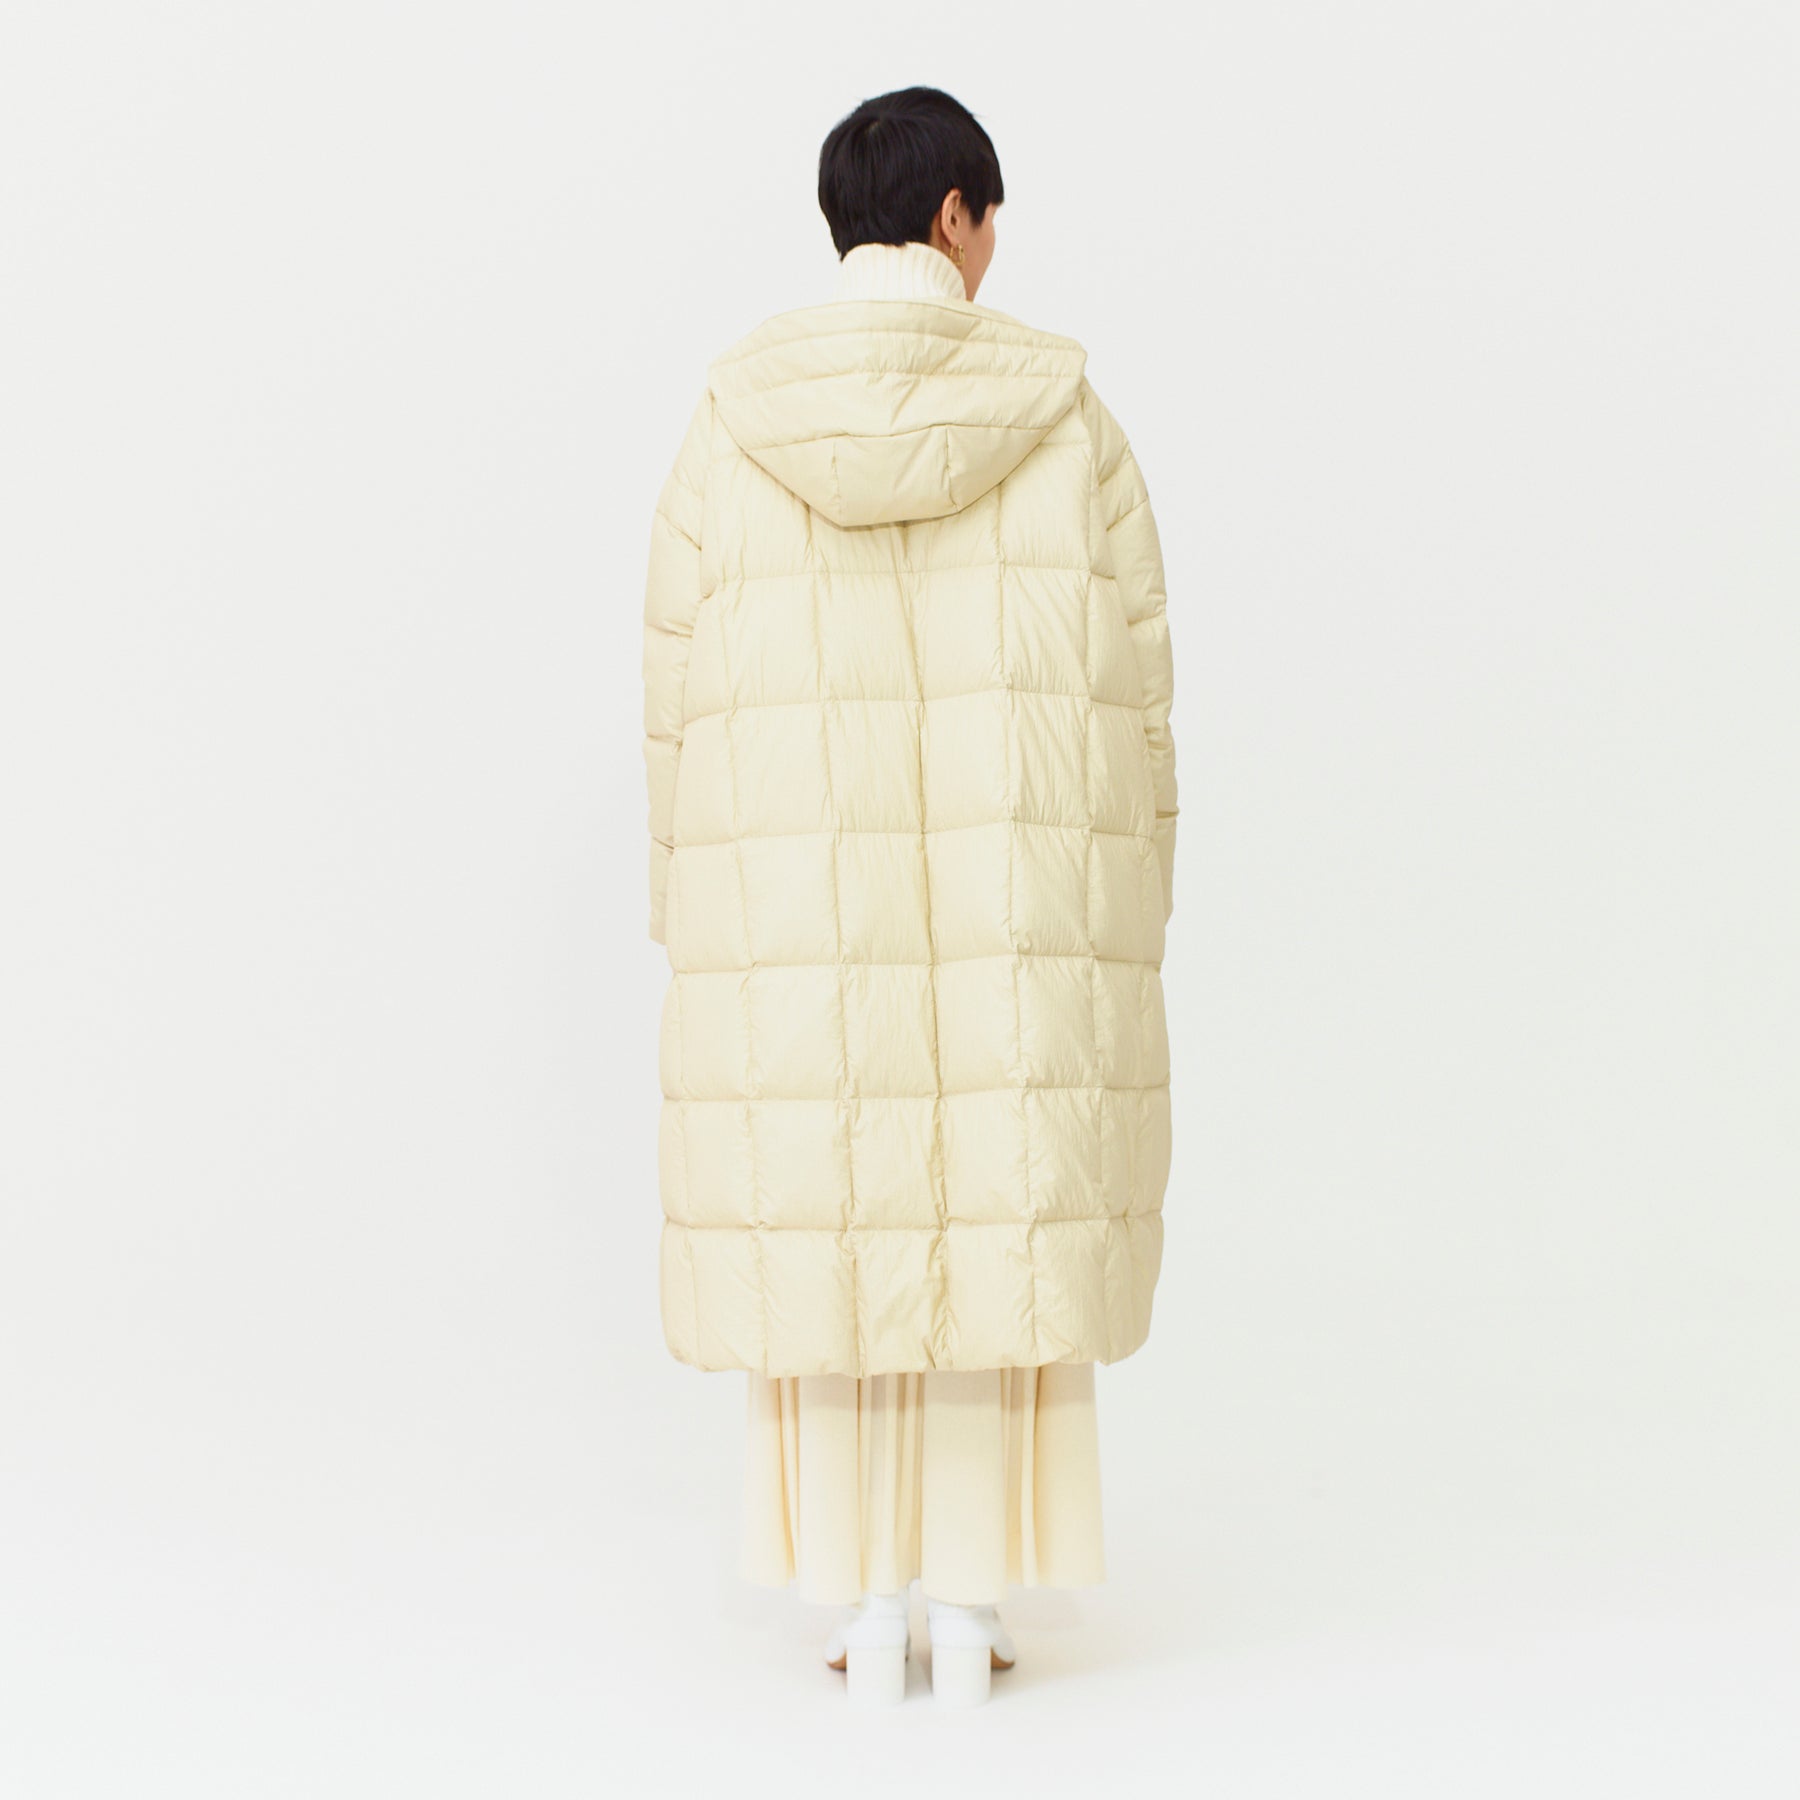 LONG COCOON DOWN JACKET /ロングコクーンダウンジャケット / S06-09 